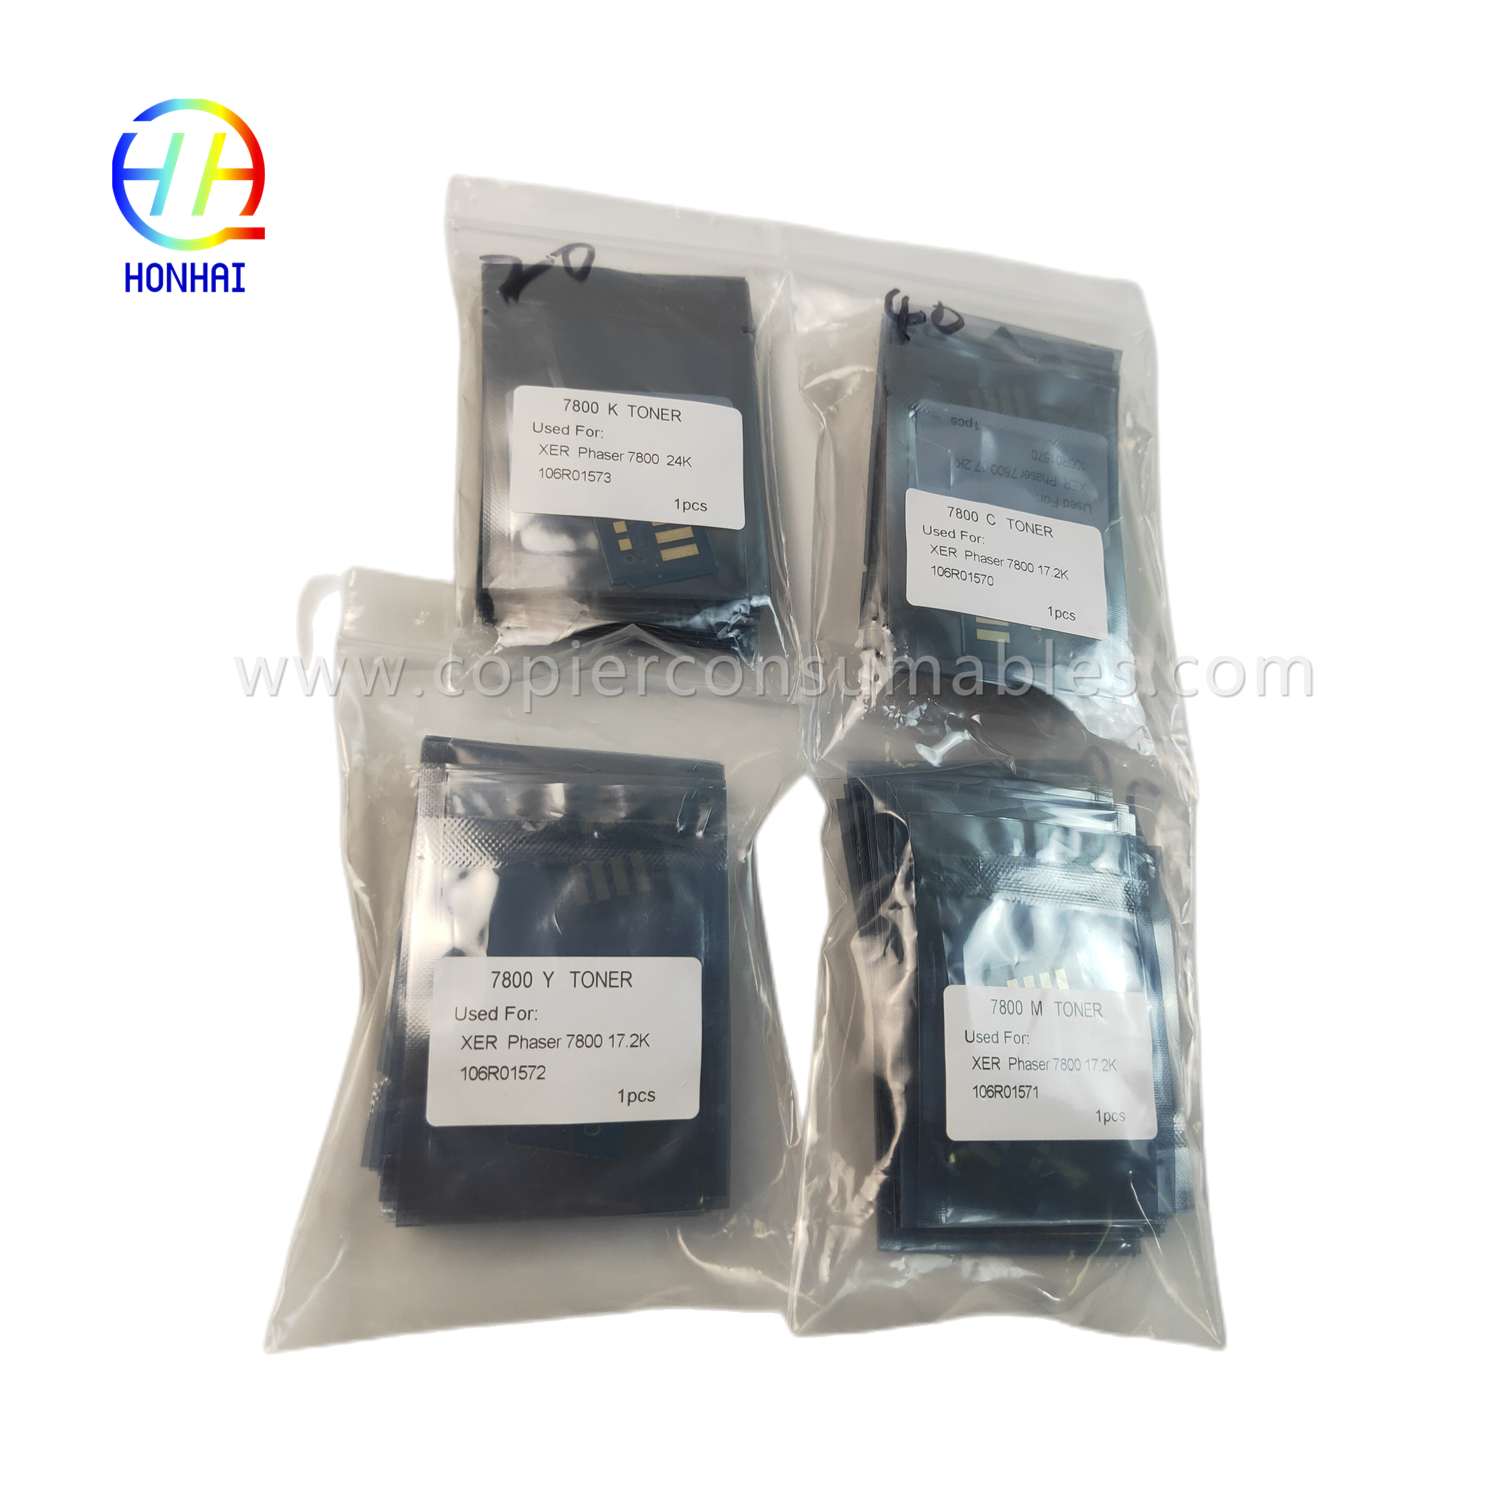 https://www.copierconsumables.com/toner-chipset-voor-xerox-phaser-7800-106r01573-106r01570-106r01571-106r01572-chip-2-product/